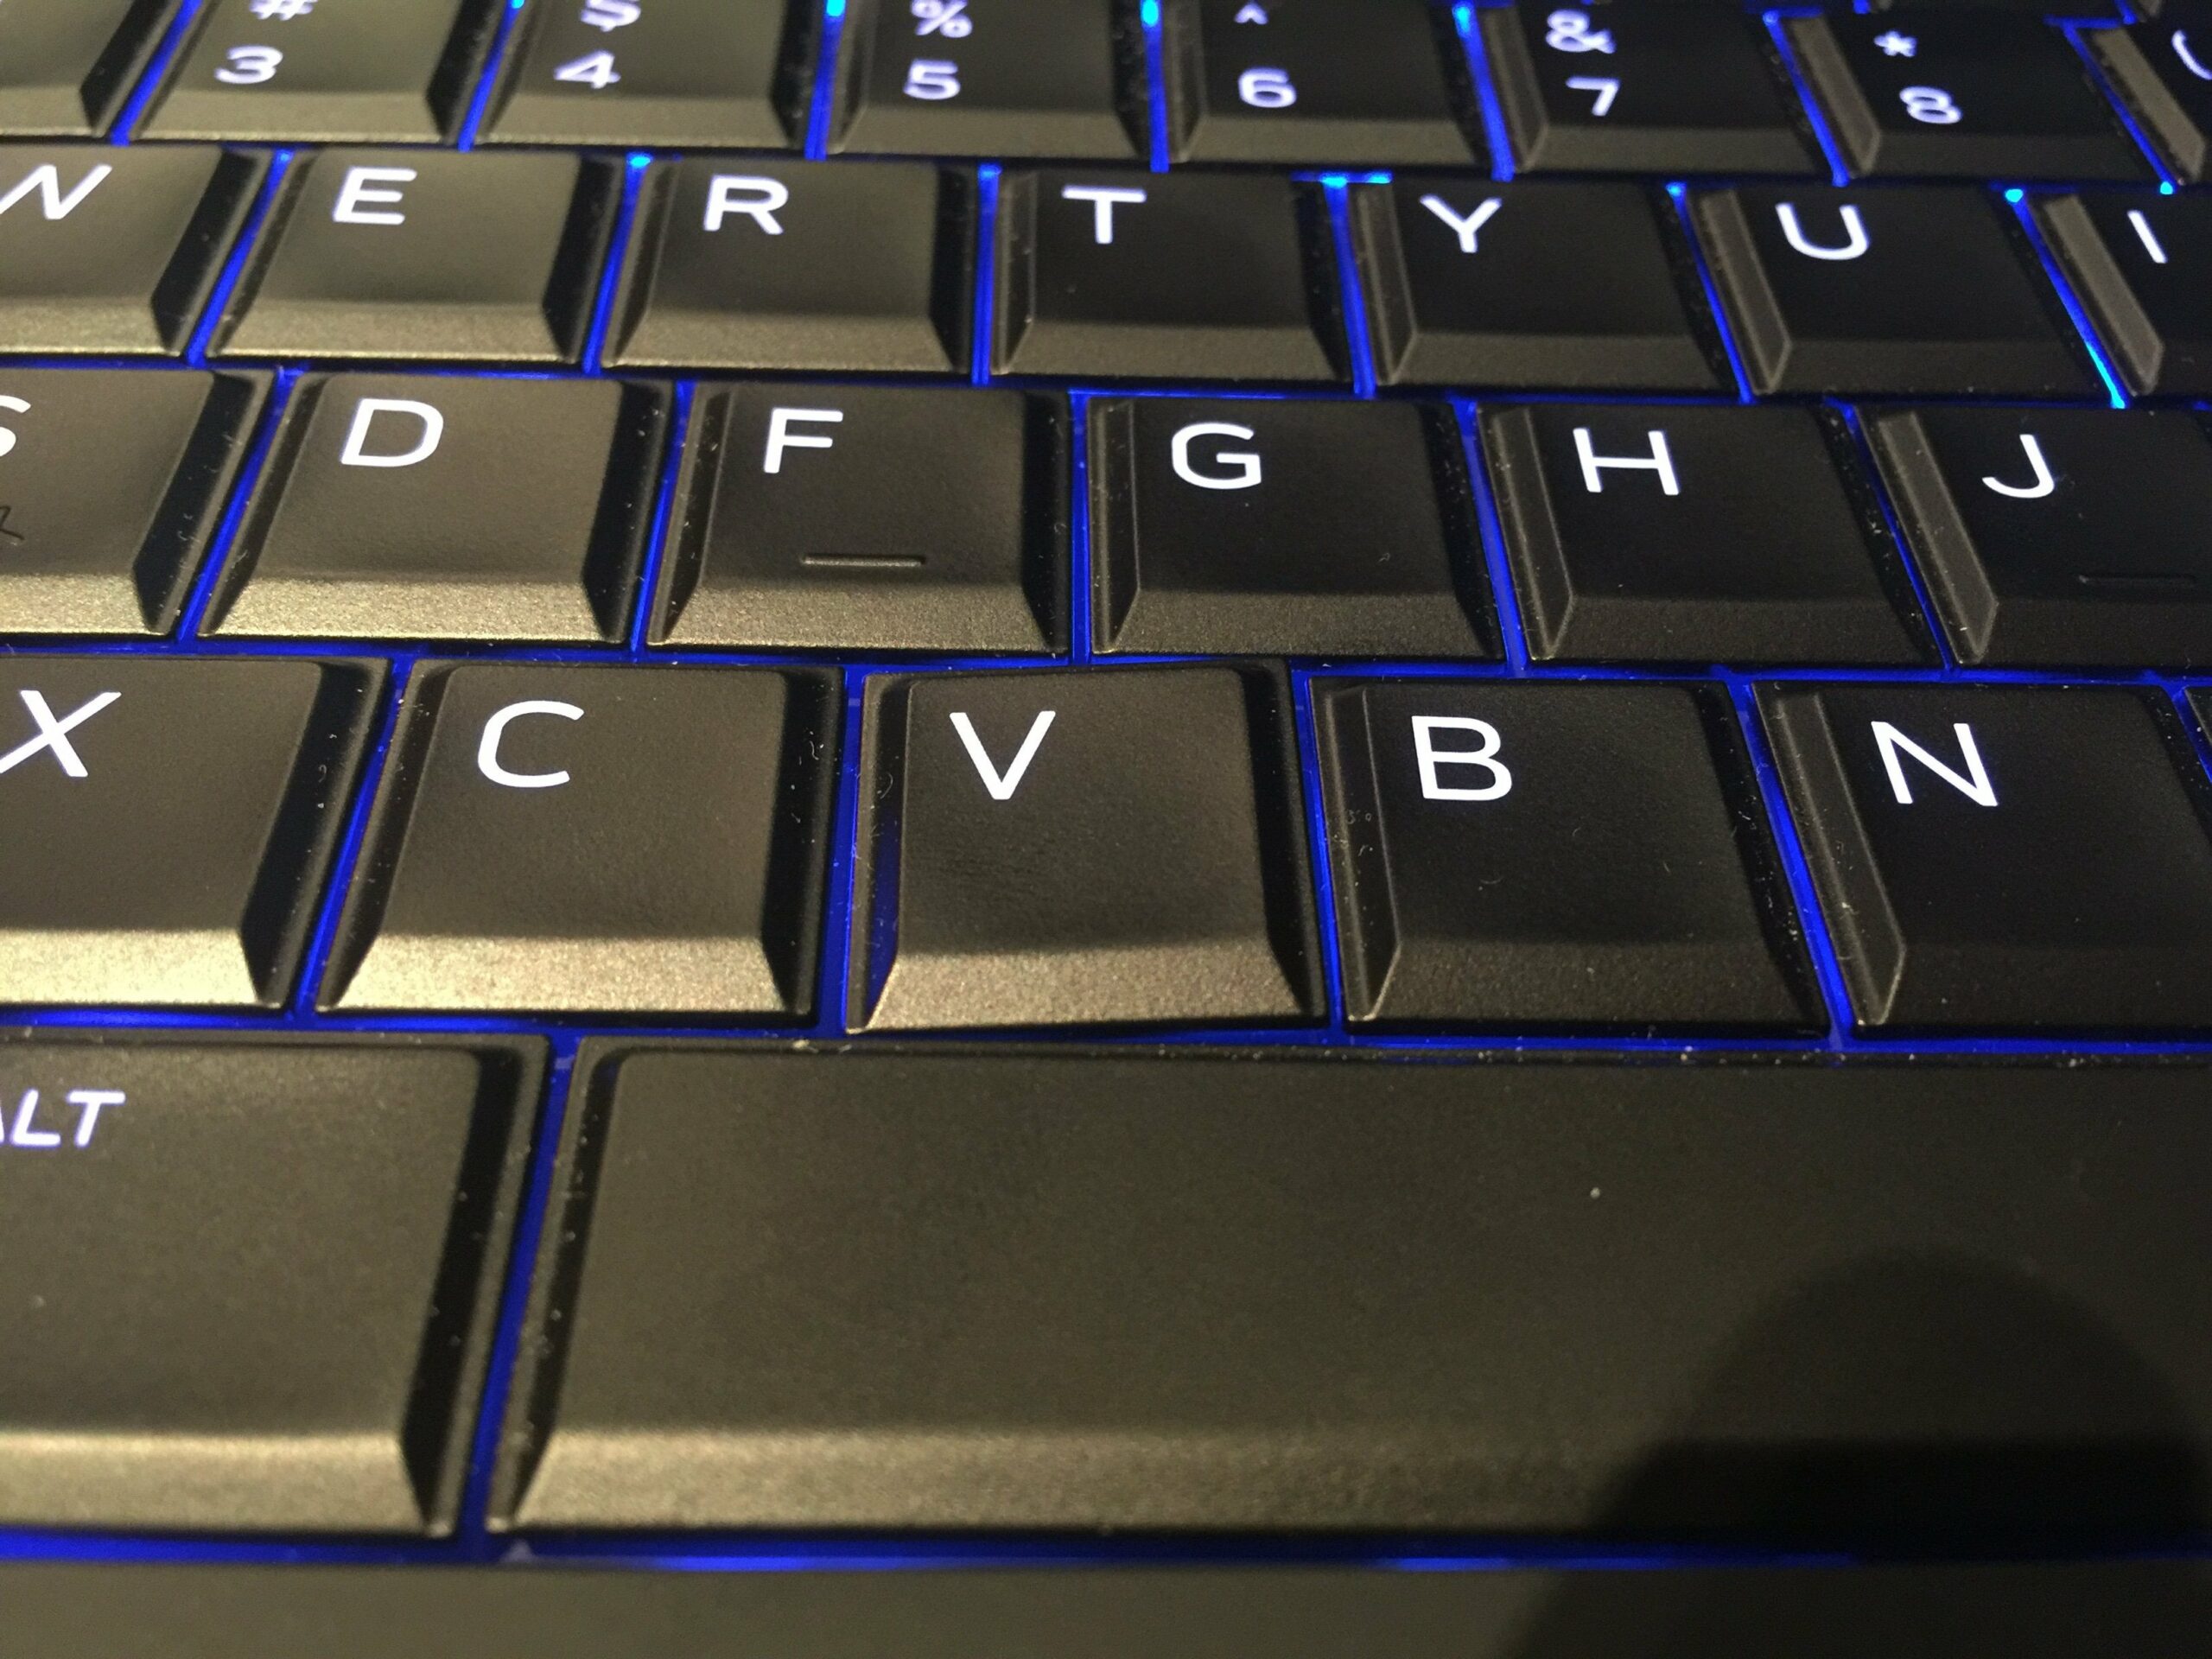 How to light up keyboard